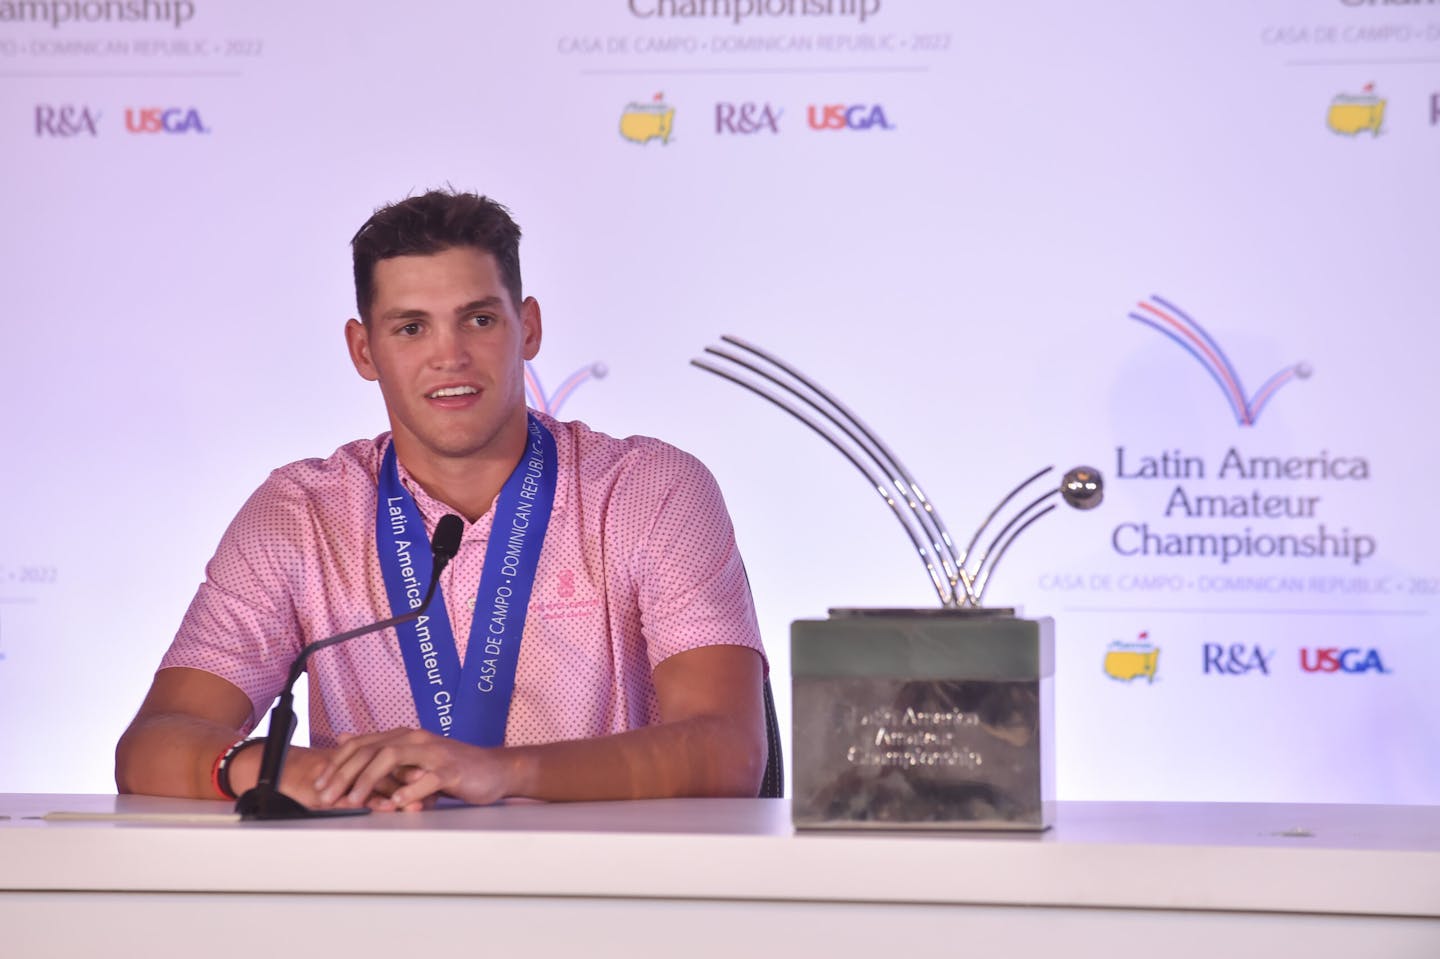 La Romana, DOMINICAN REPUBLIC: Aaron Jarvis of Cayman Islands pictured at the 2022 Latin America Amateur Championship at Casa de Campo Resort during Champion Press conference on January 23rd, 2022.